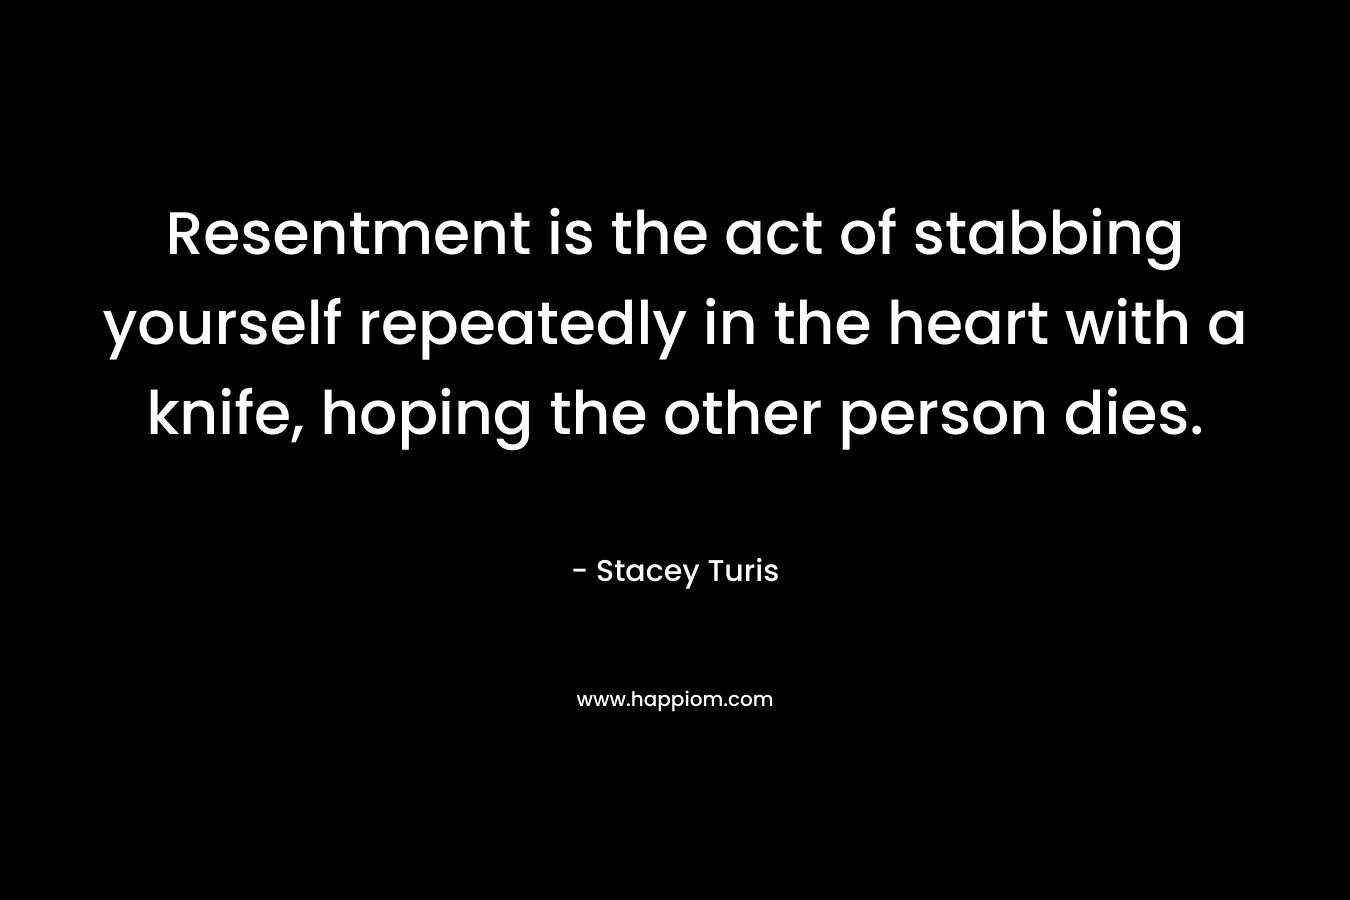 Resentment is the act of stabbing yourself repeatedly in the heart with a knife, hoping the other person dies. – Stacey Turis